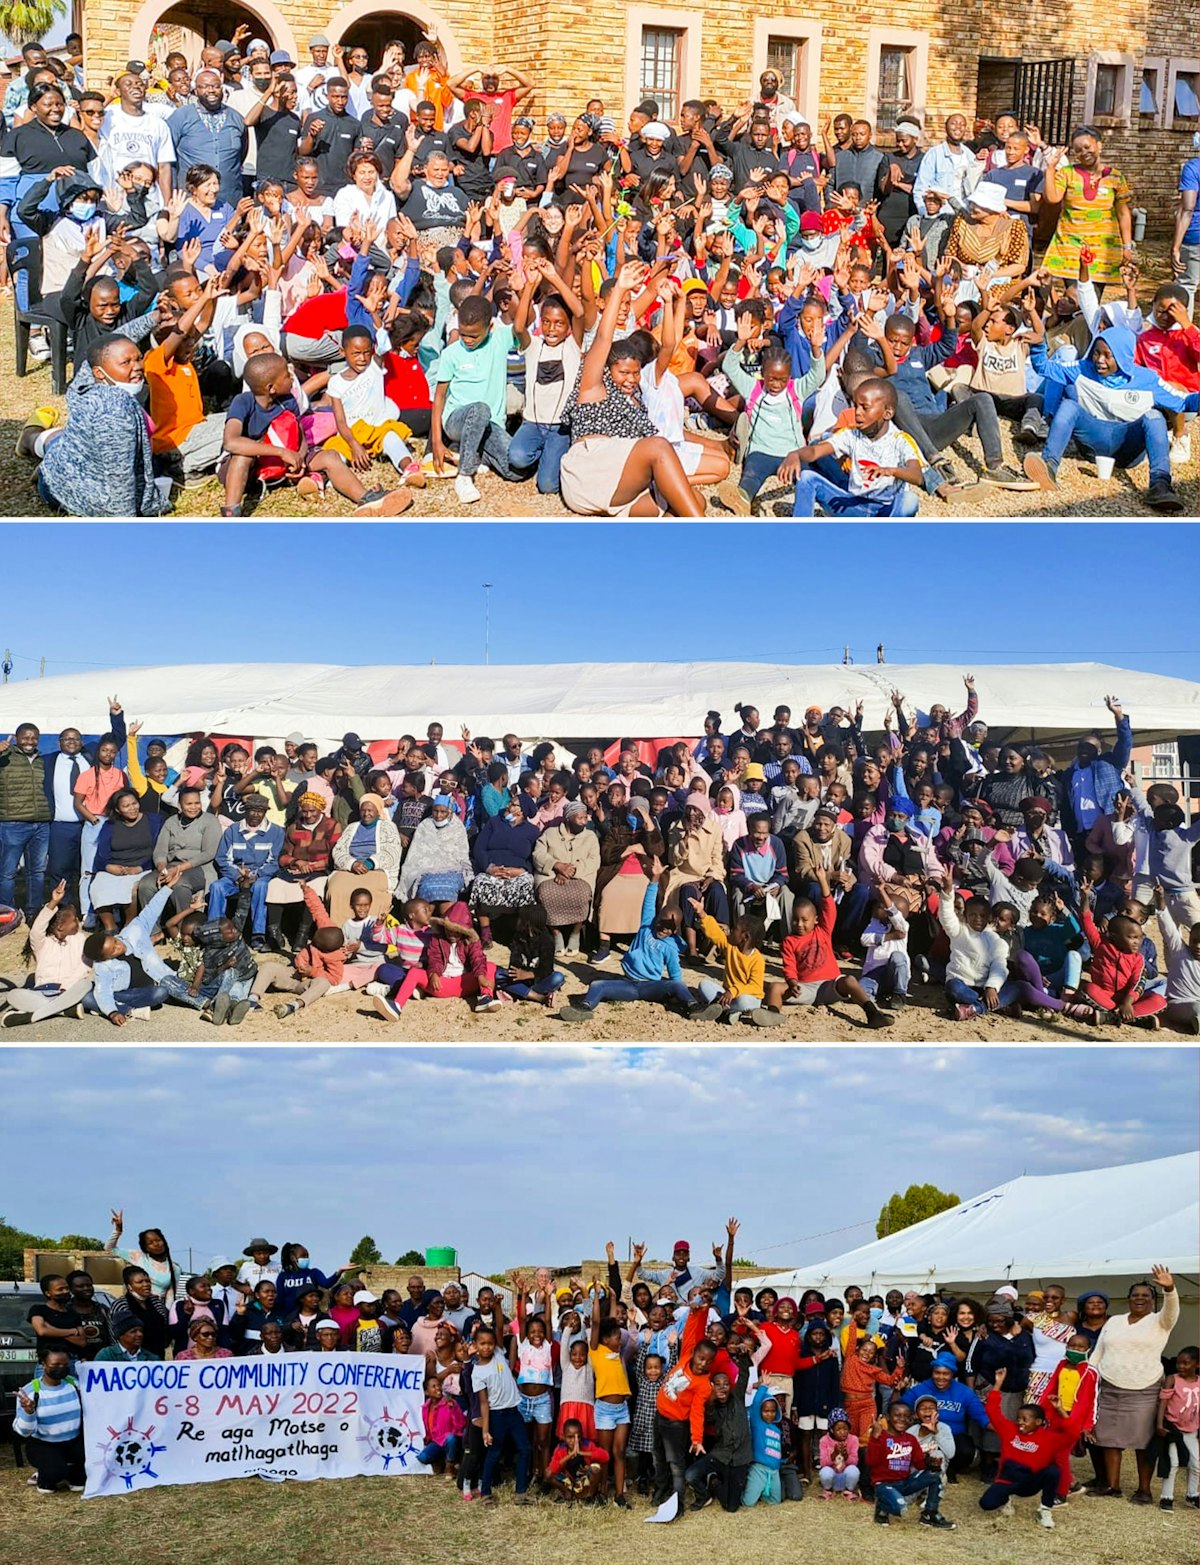 Pictured here are local conferences in Nellmapius, Khayelitsha, and Mogogoe, South Africa.